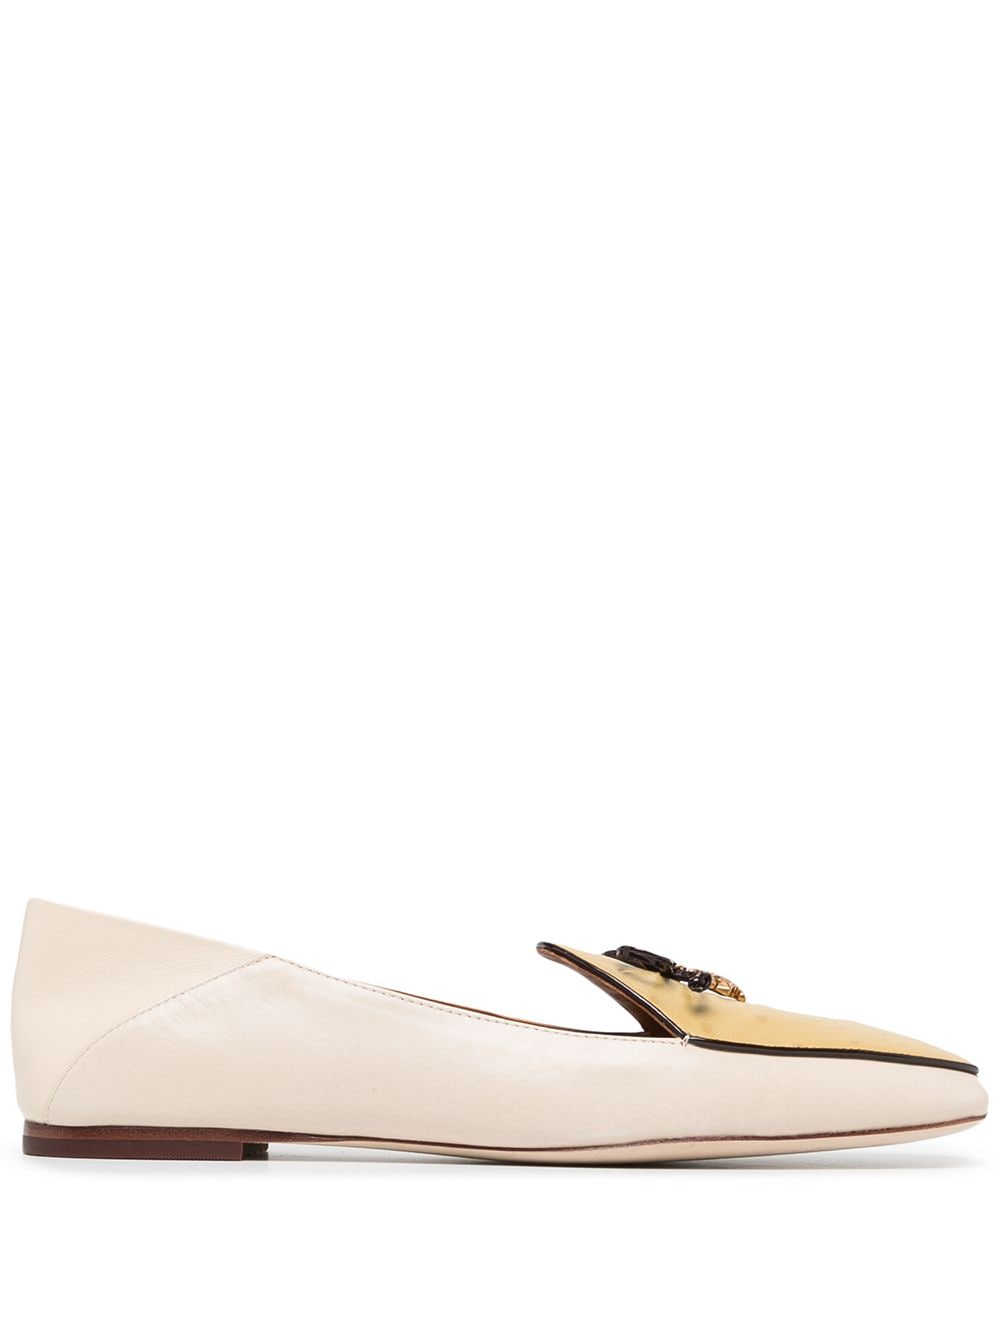 Tory Burch Tory Charm Leather Loafers - Farfetch